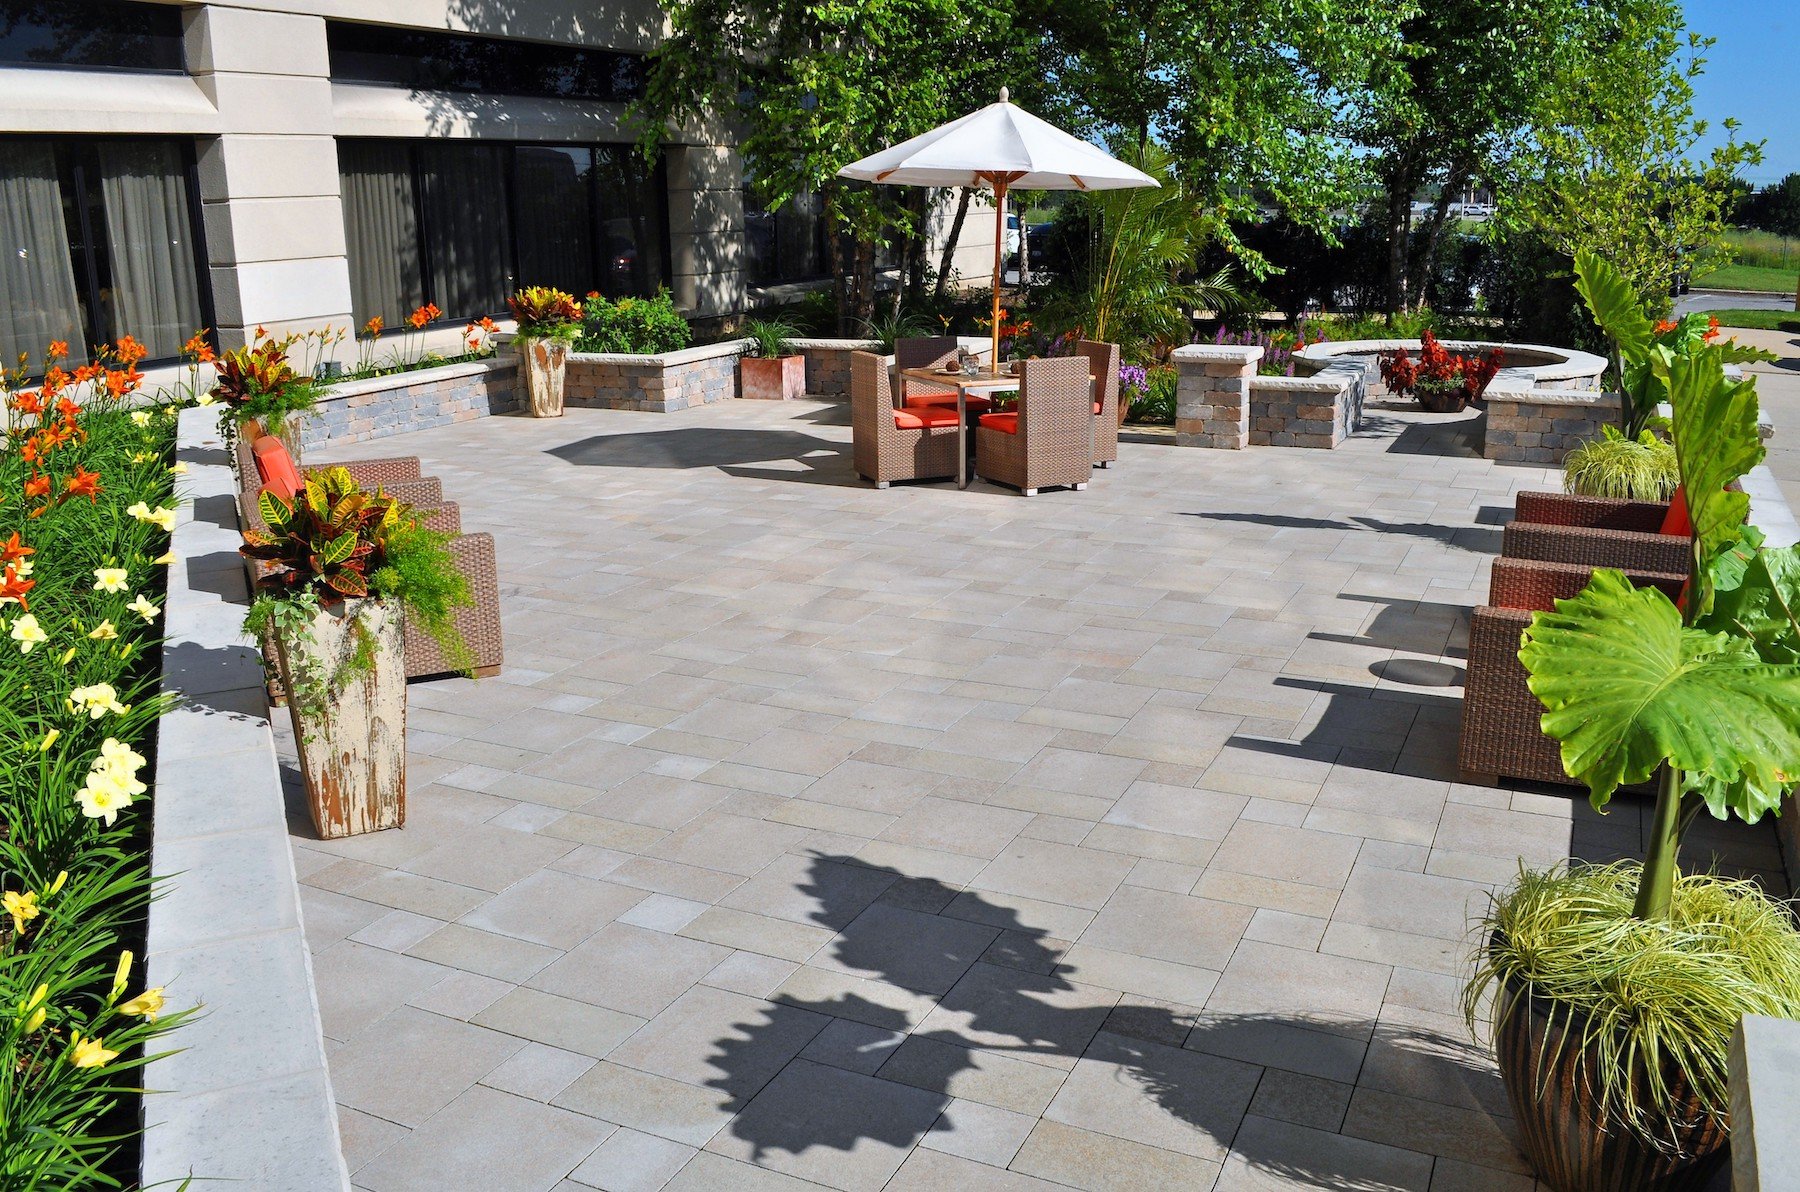 5 Simple Commercial Landscaping Enhancements That Have a Big Impact